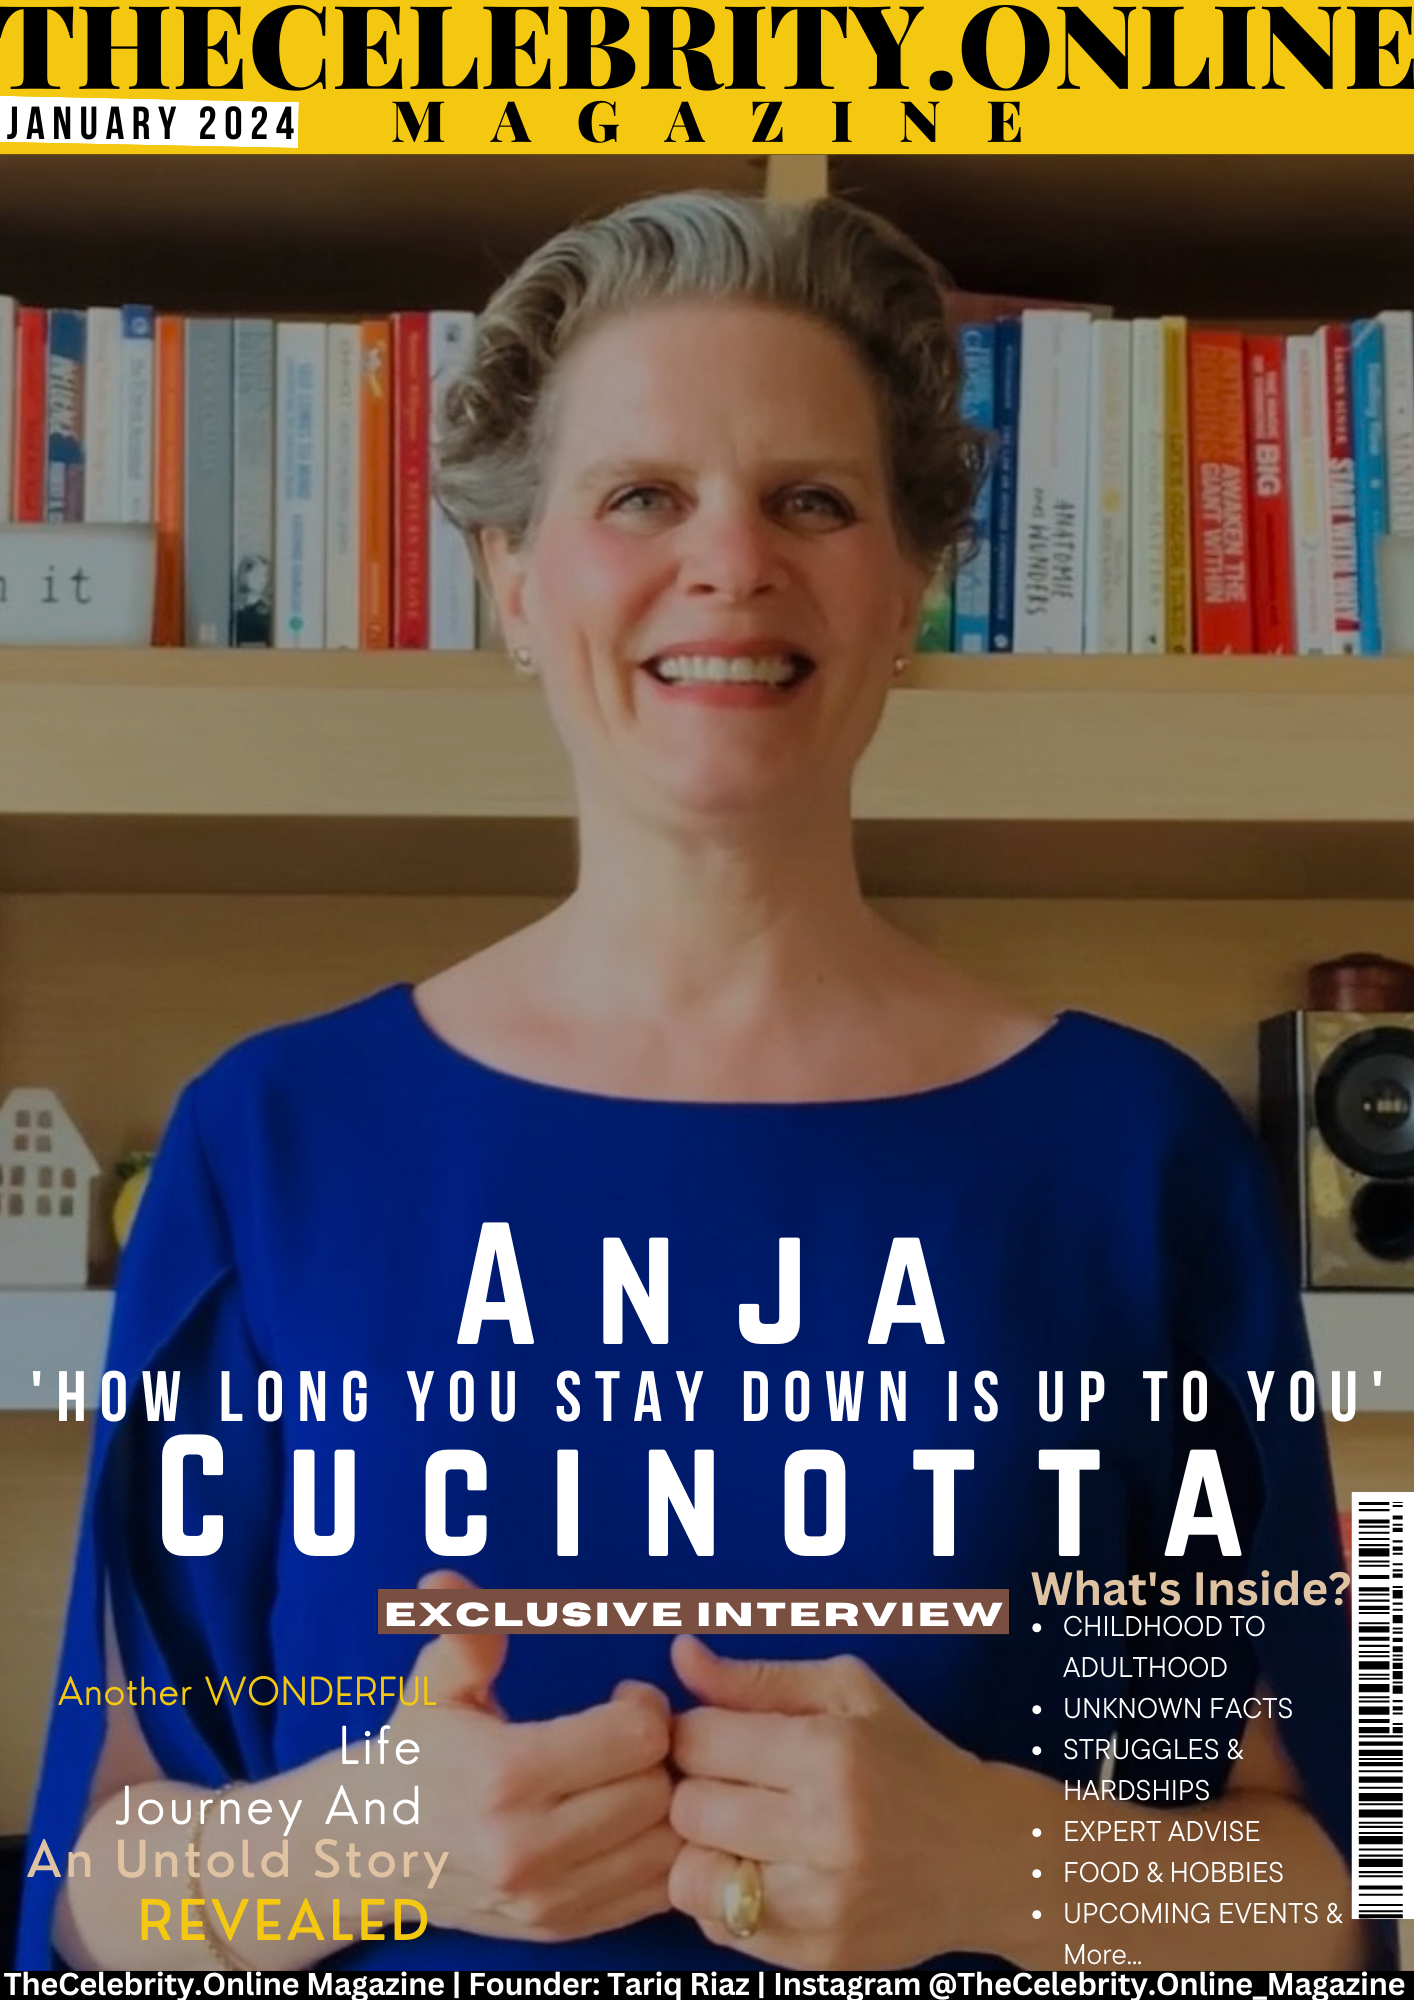 Anja Cucinotta Exclusive Interview – ‘How Long You Stay Down Is Up To You’